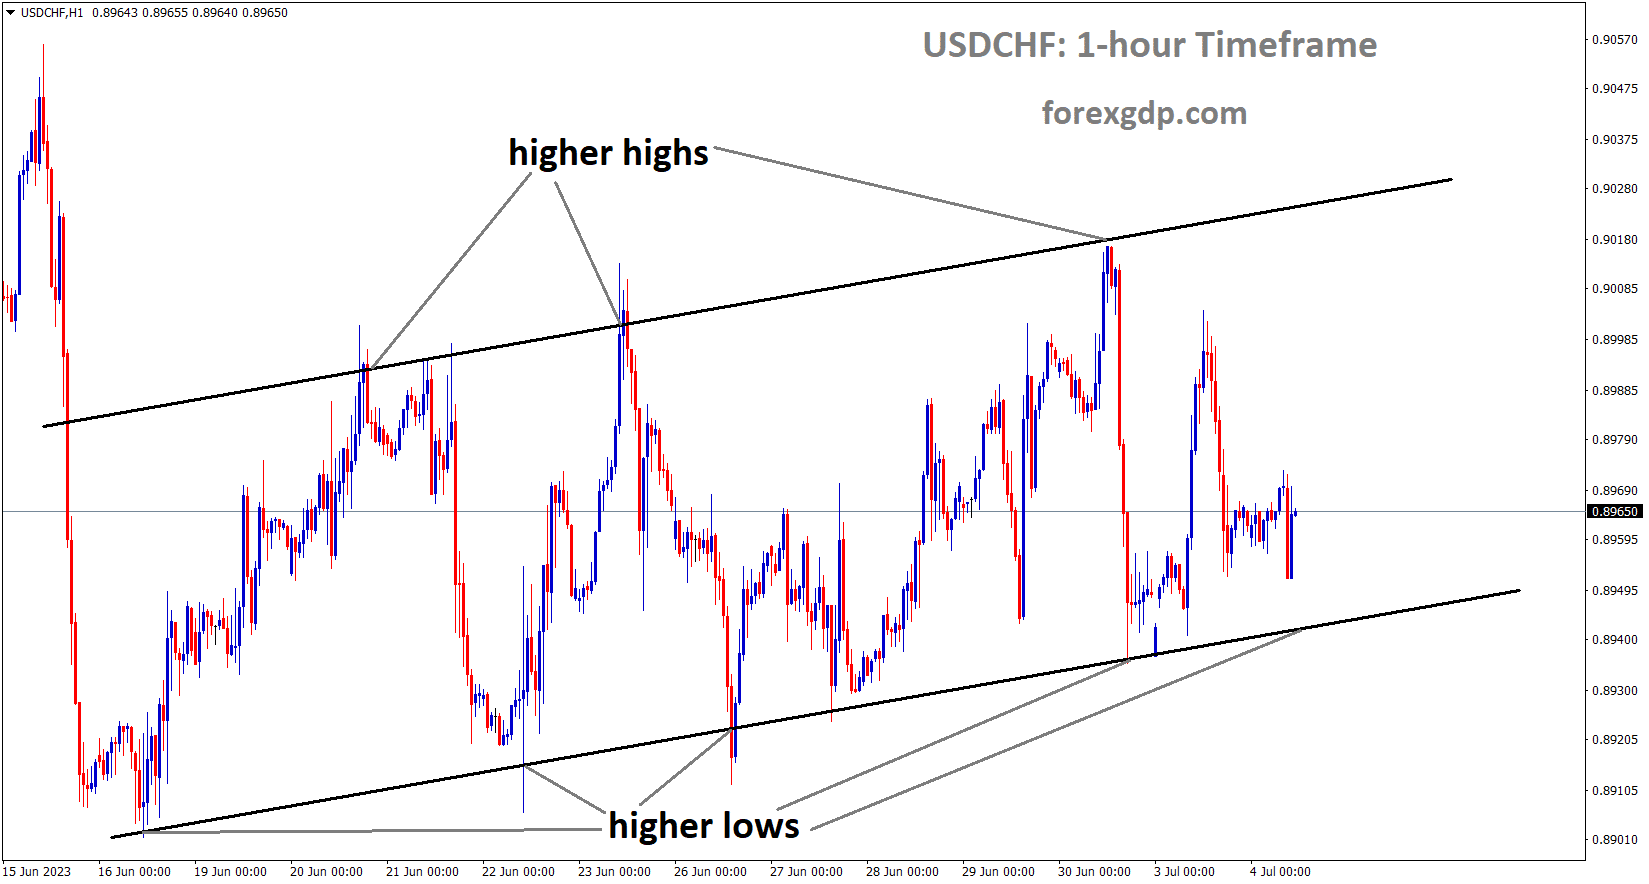 USDCHF is moving in an Ascending channel and the market has reached the higher low area of the channel